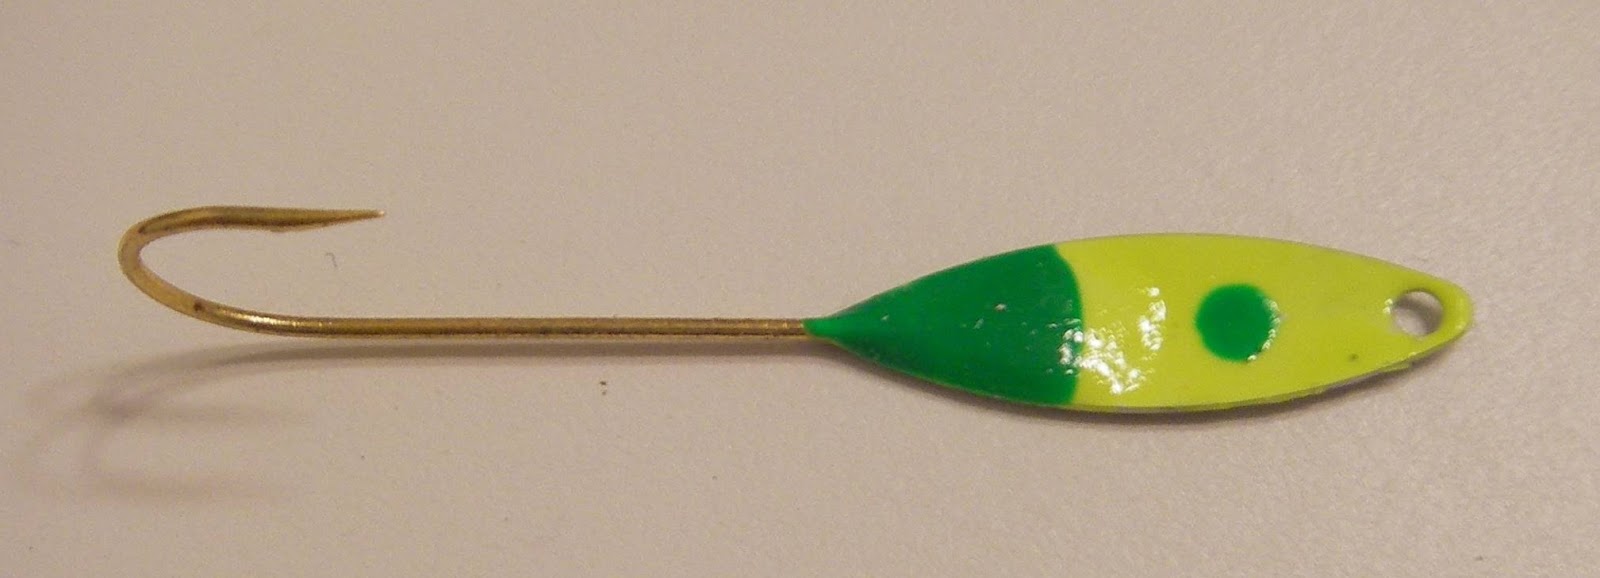 painted shad spoon